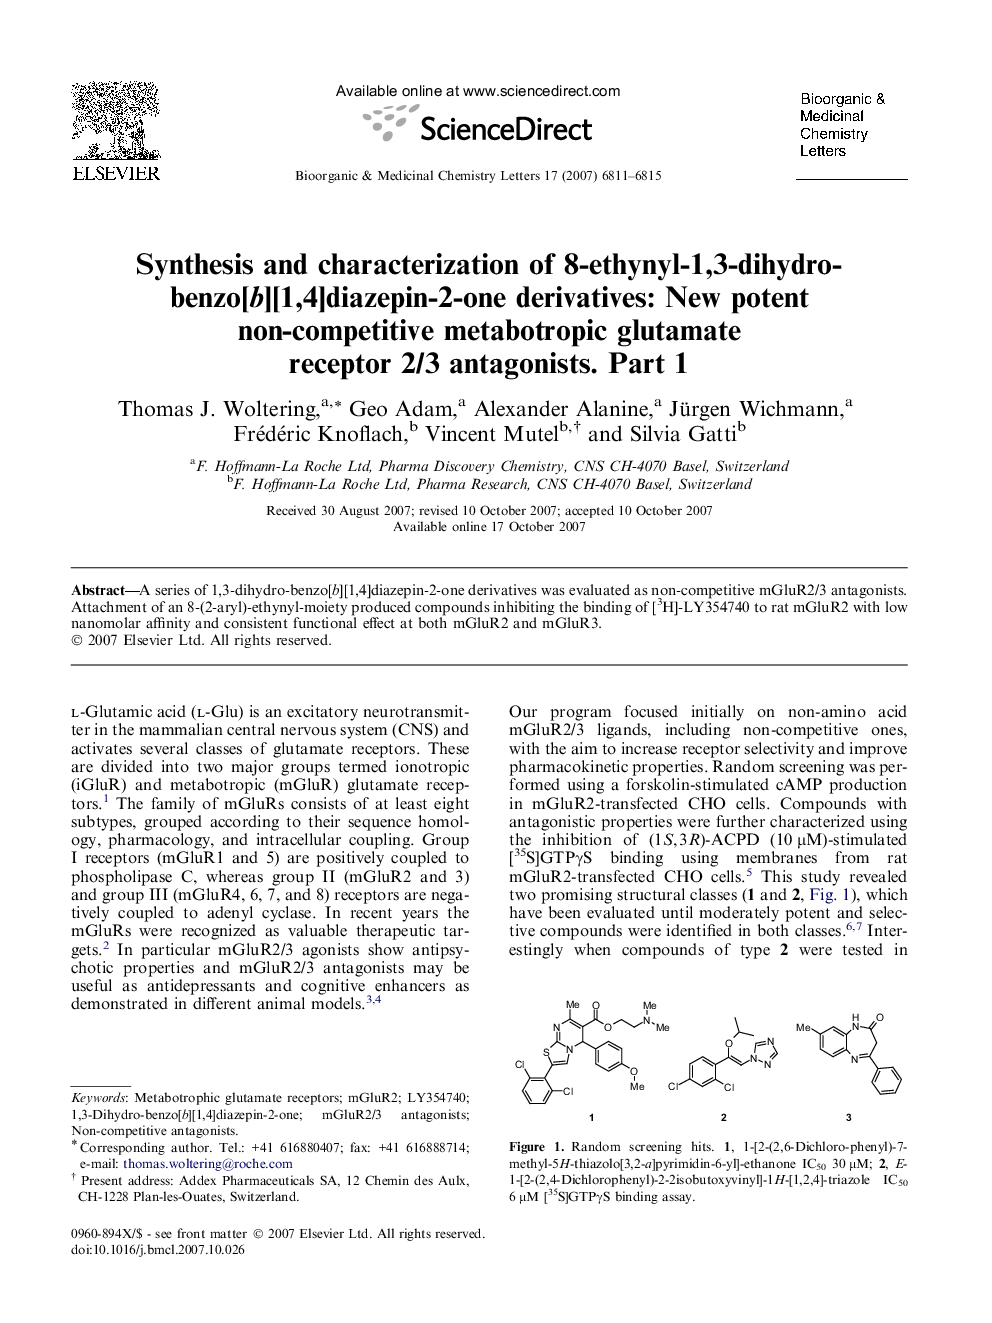 Synthesis and characterization of 8-ethynyl-1,3-dihydro-benzo[b][1,4]diazepin-2-one derivatives: New potent non-competitive metabotropic glutamate receptor 2/3 antagonists. Part 1